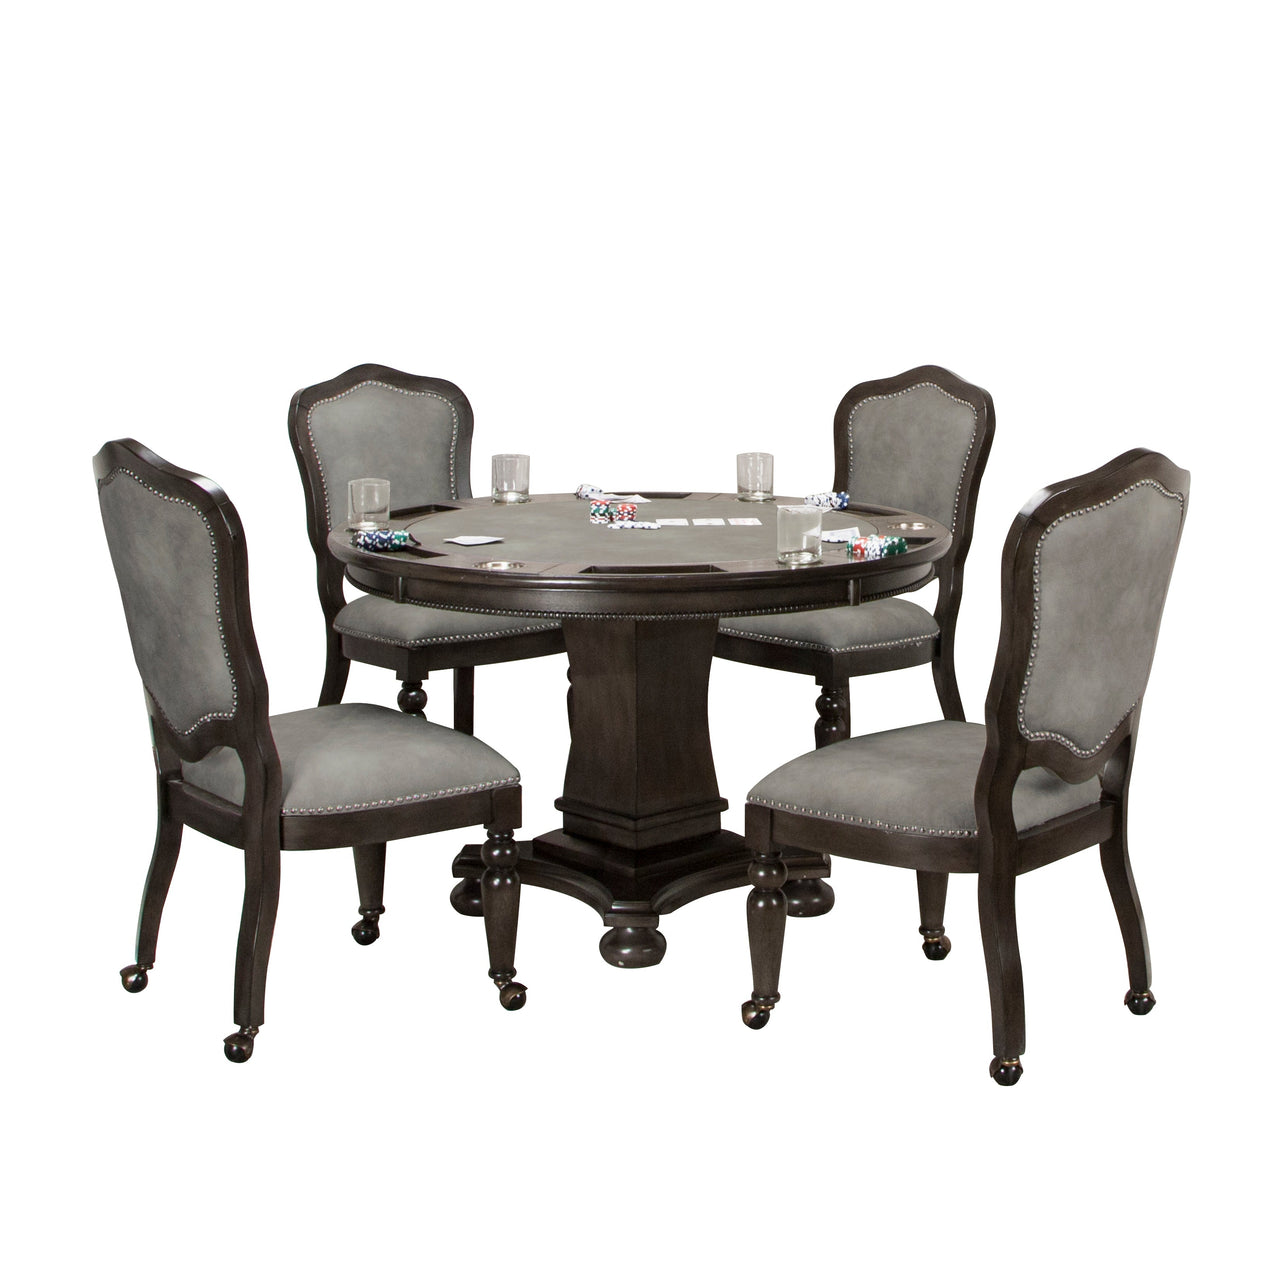 Convertible Poker & Dining Table Vegas by Sunset Trading-AMERICANA-POKER-TABLES